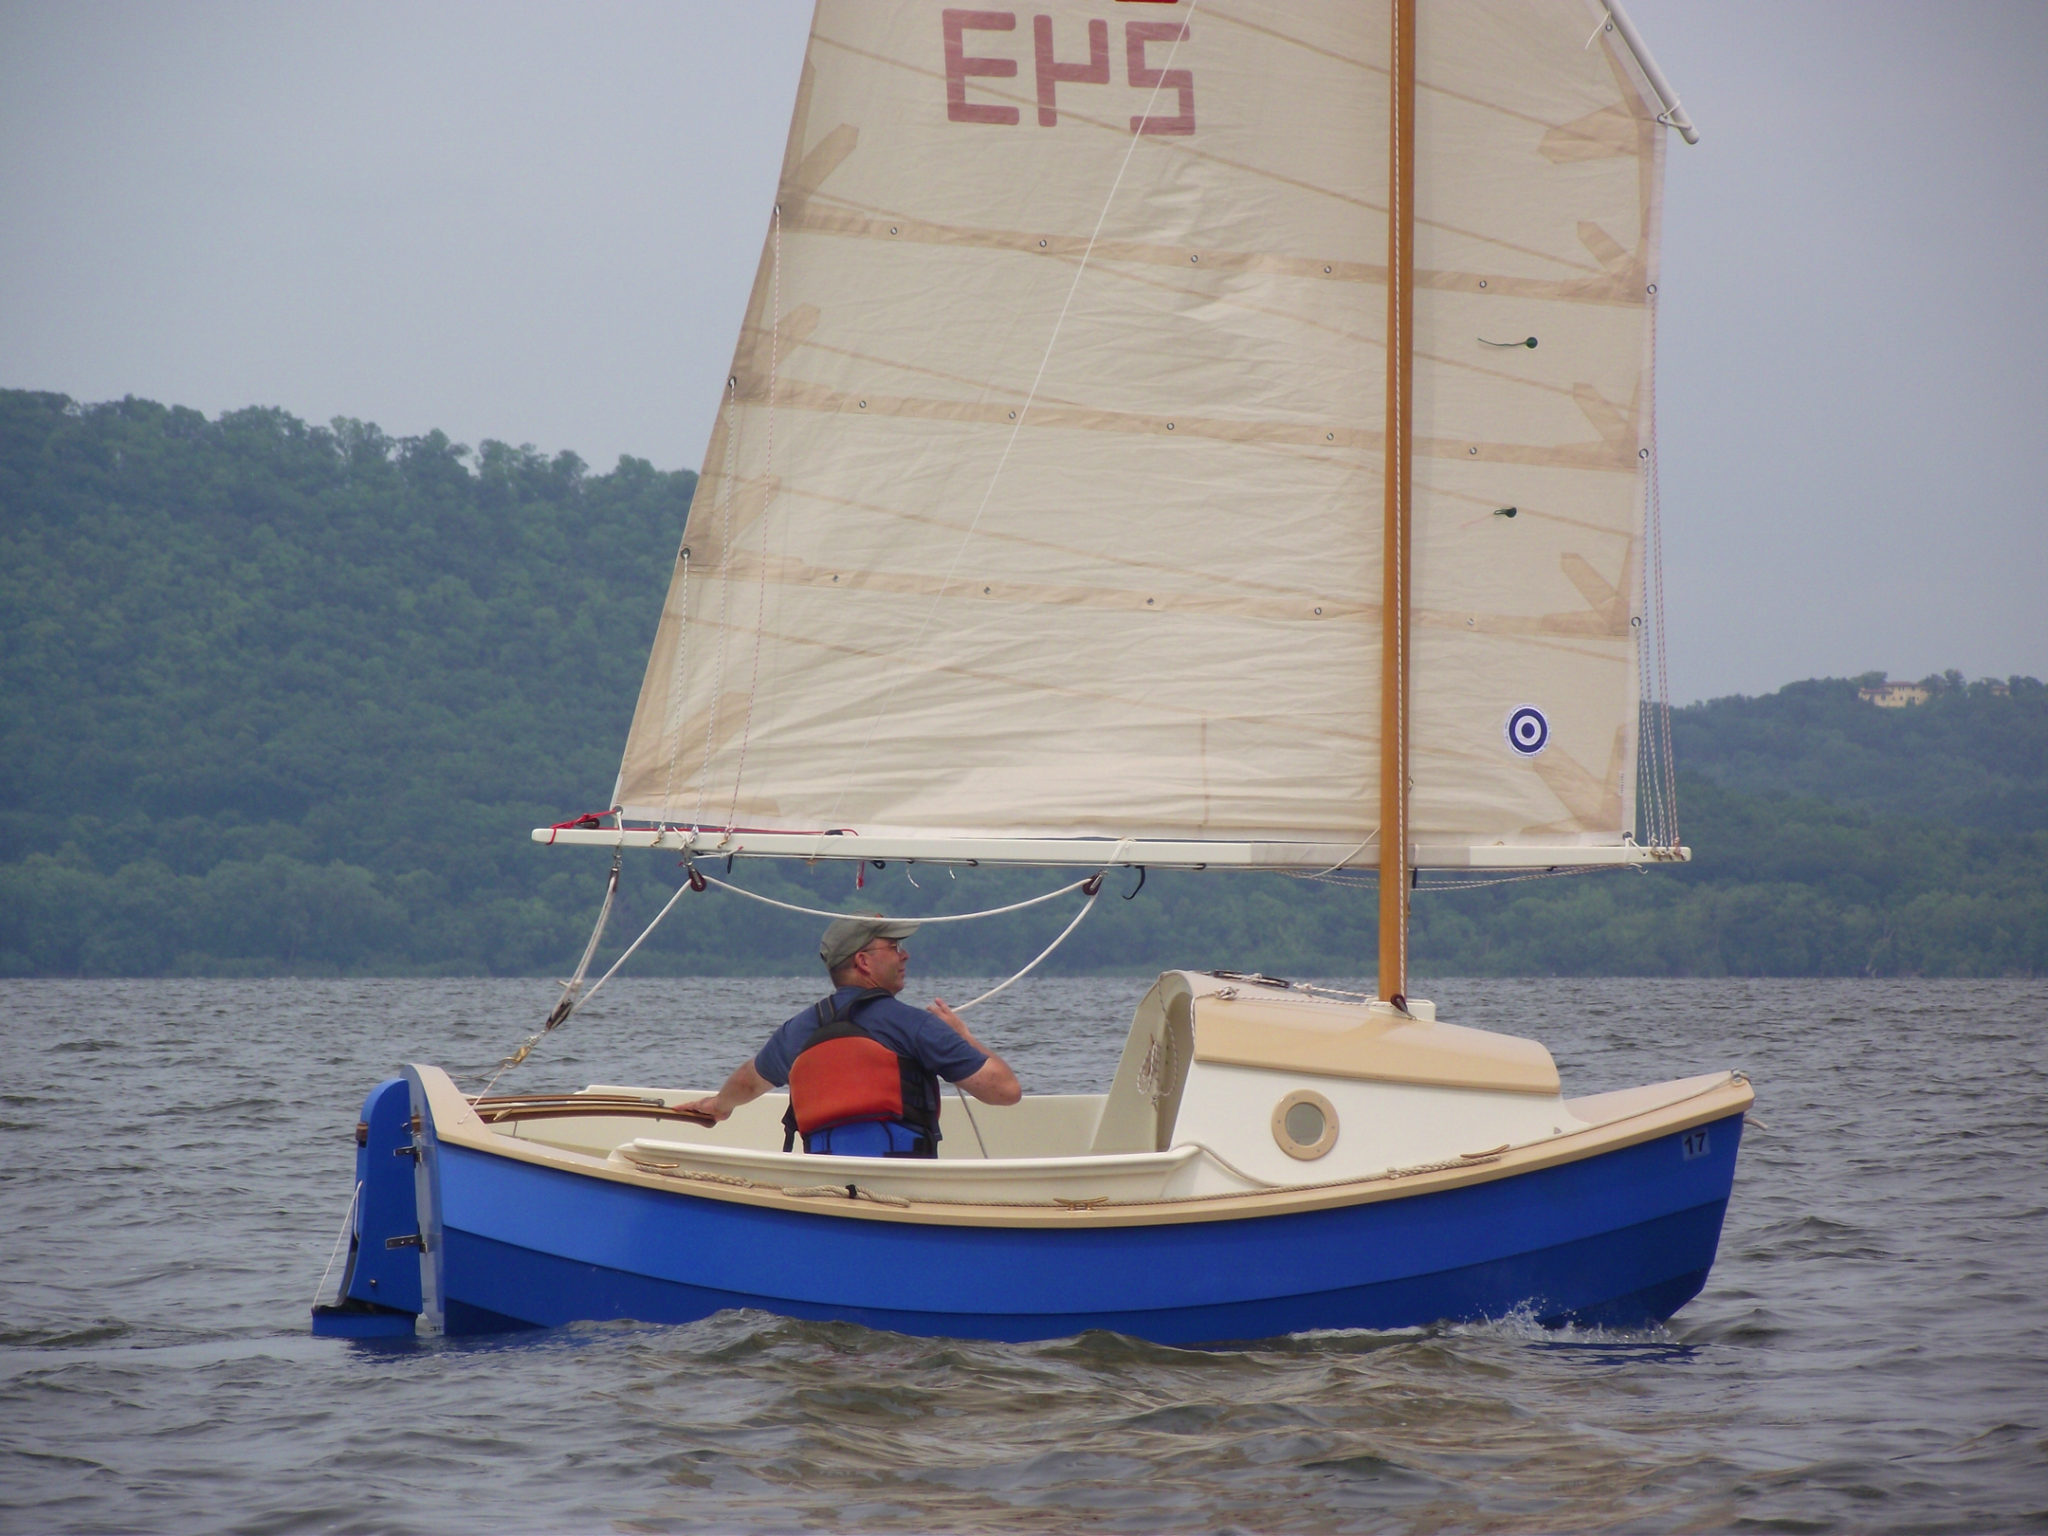 scamp sailboat for sale uk